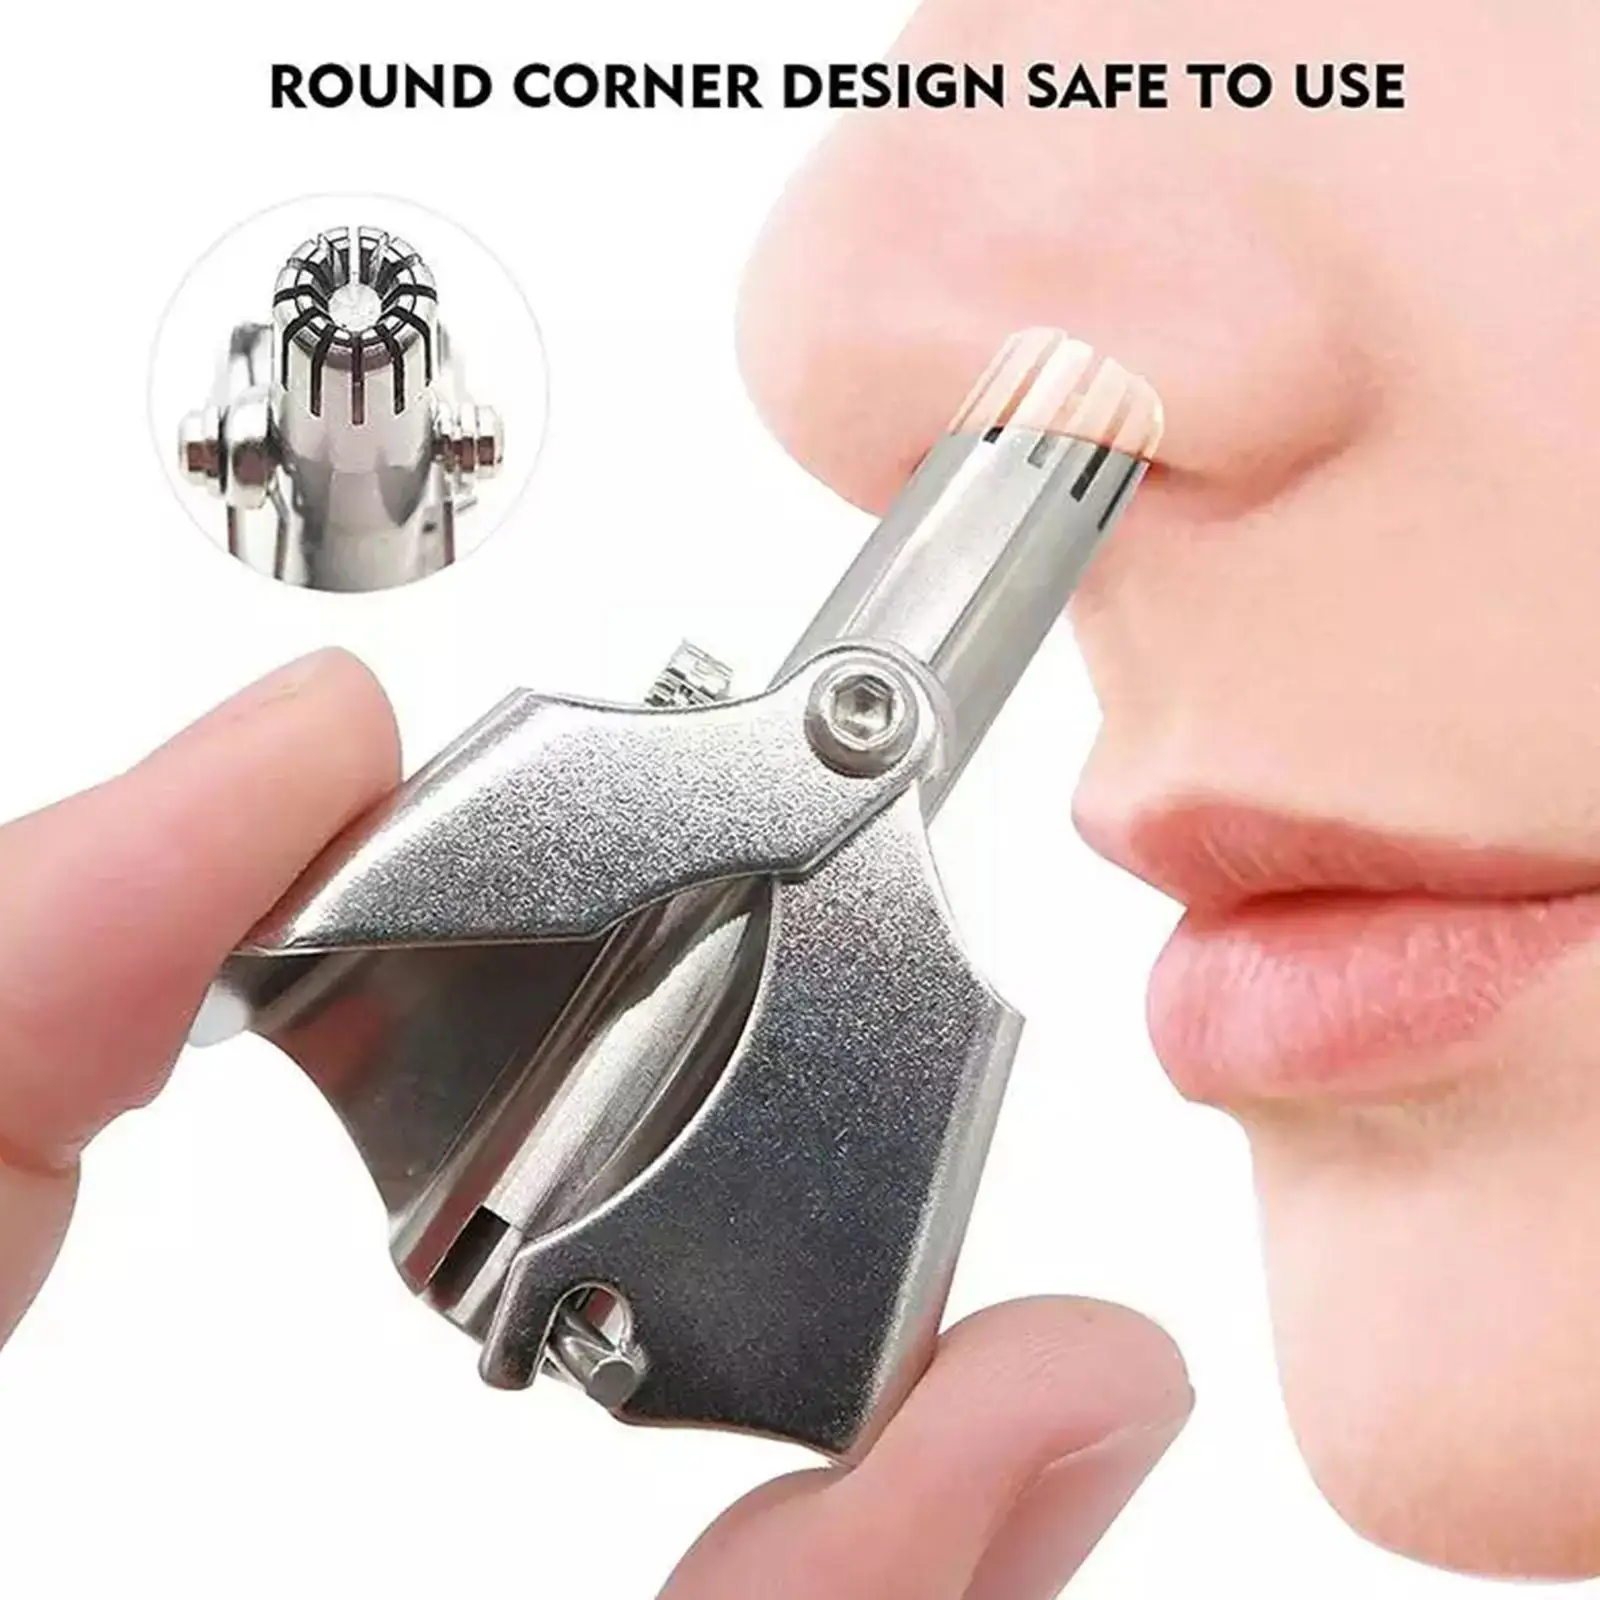 

Nose Trimer For Men Ears Trimmer Ear Hairs Male Epilator Hair Cutter Eyebrows Cleaning Tool Clippers Shaver Beard Haircut B G3C0